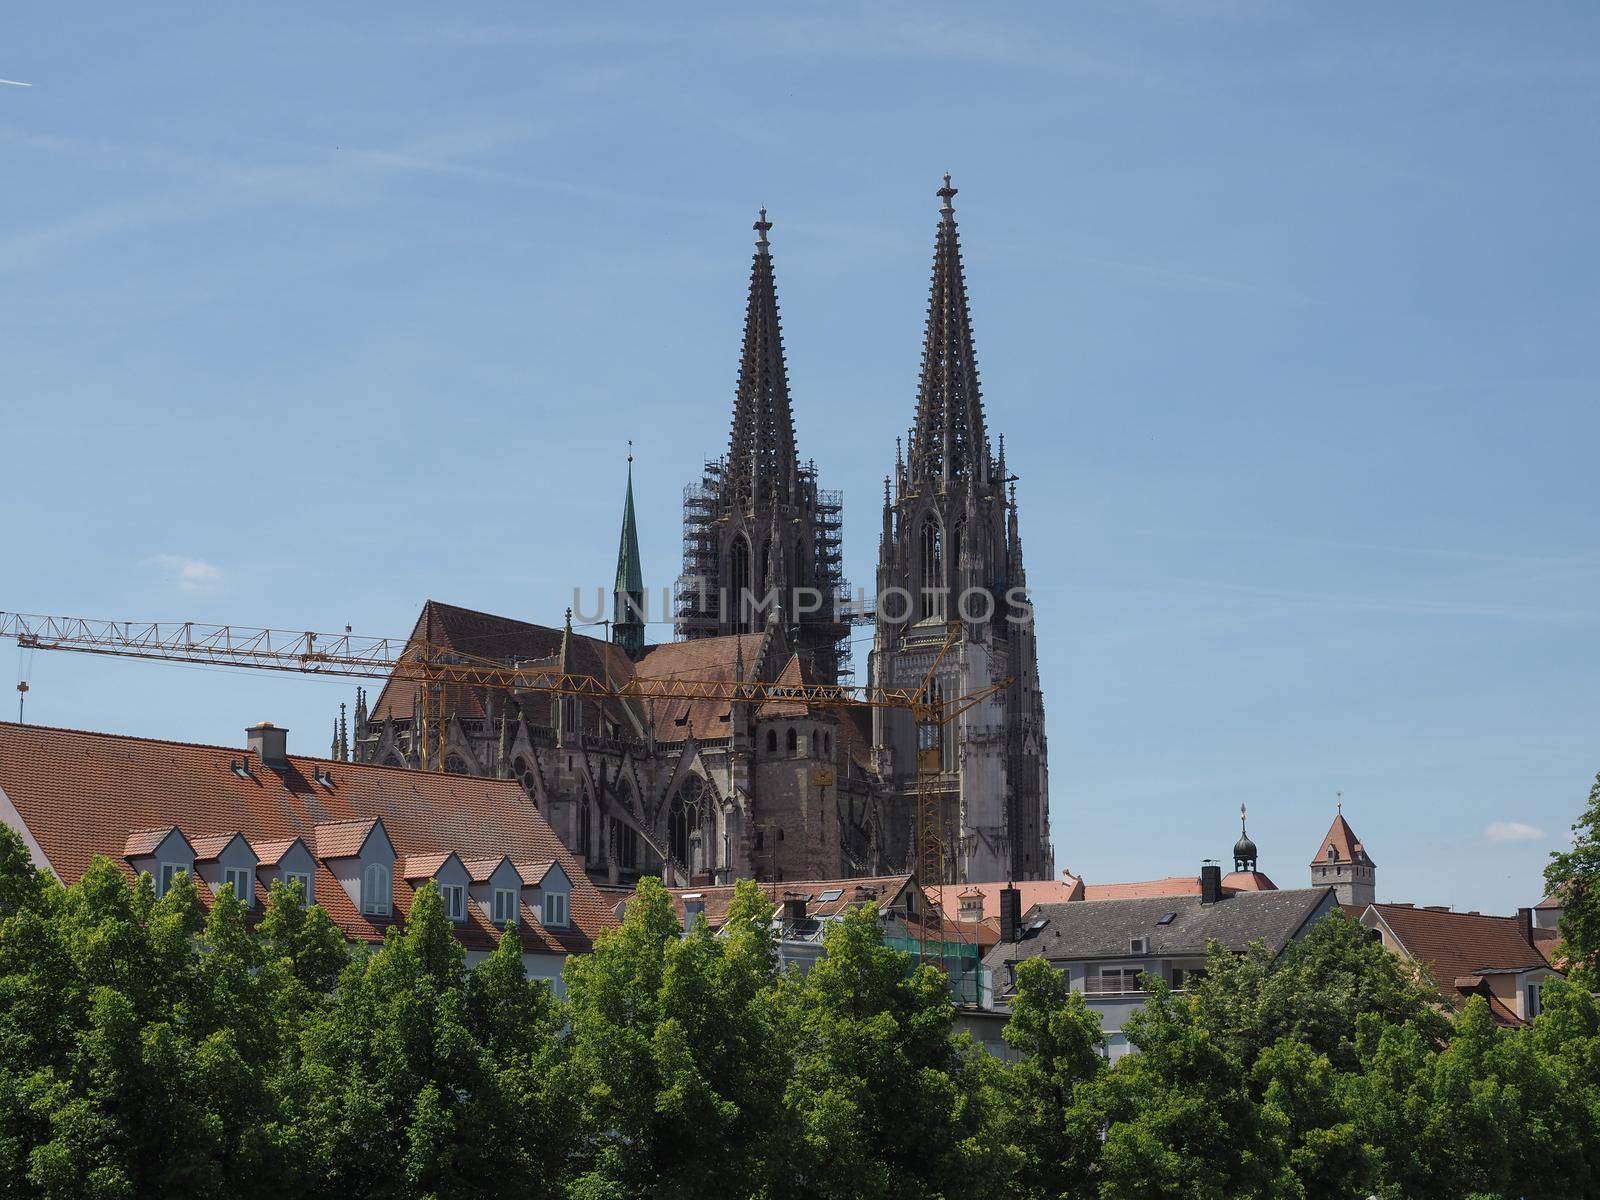 Regensburger Dom aka St Peter cathedral church in Regensburg, Germany